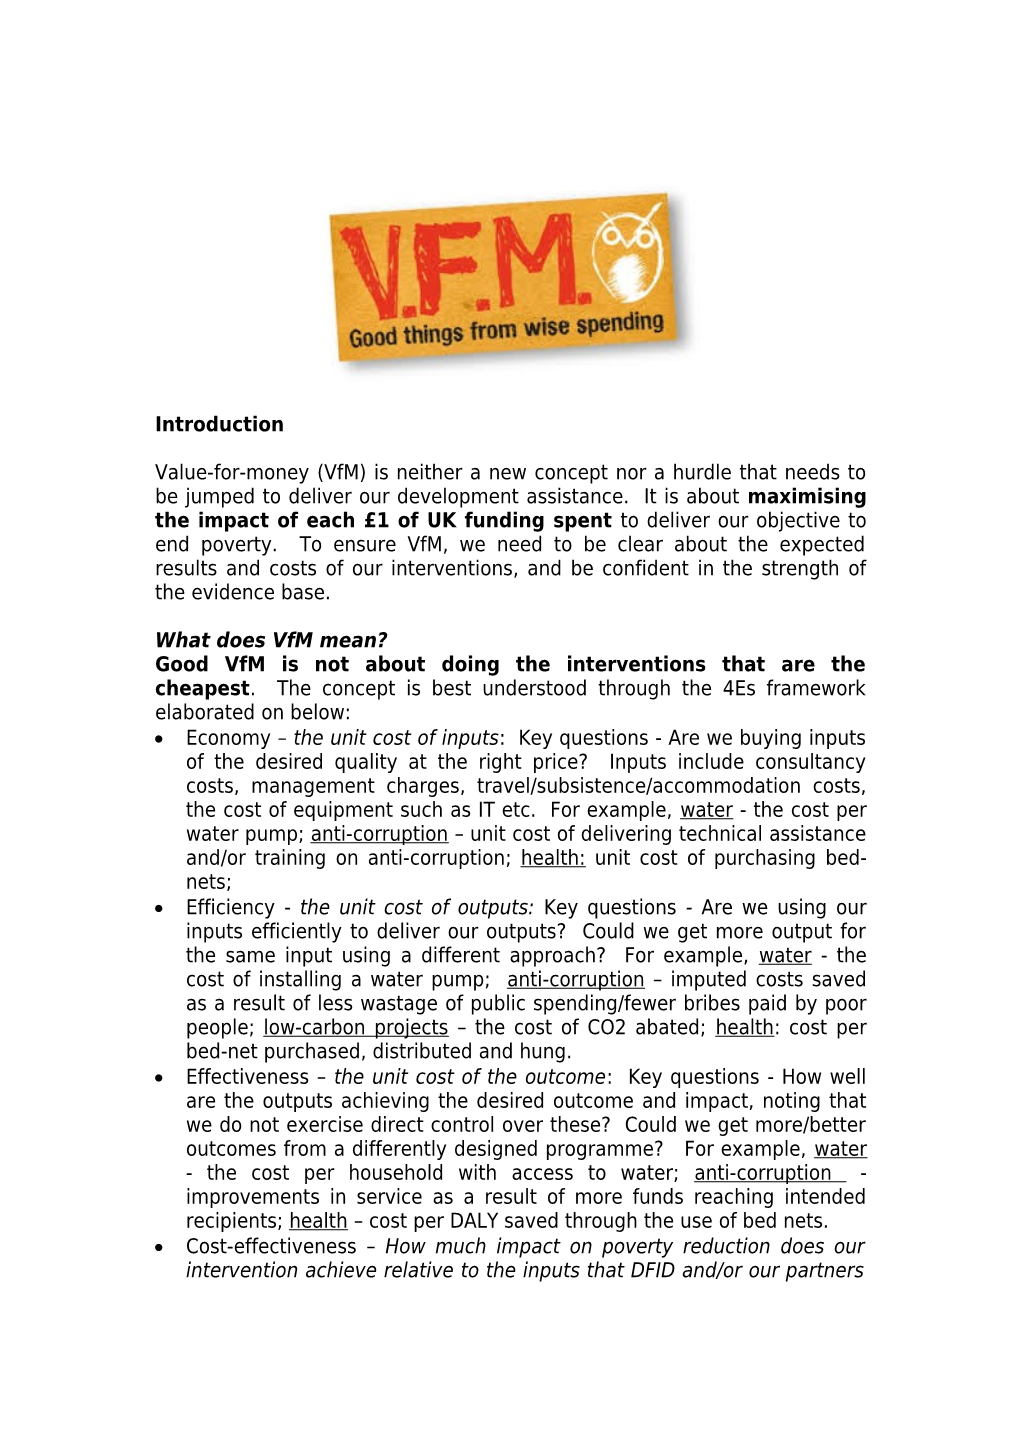 What Does Vfm Mean?